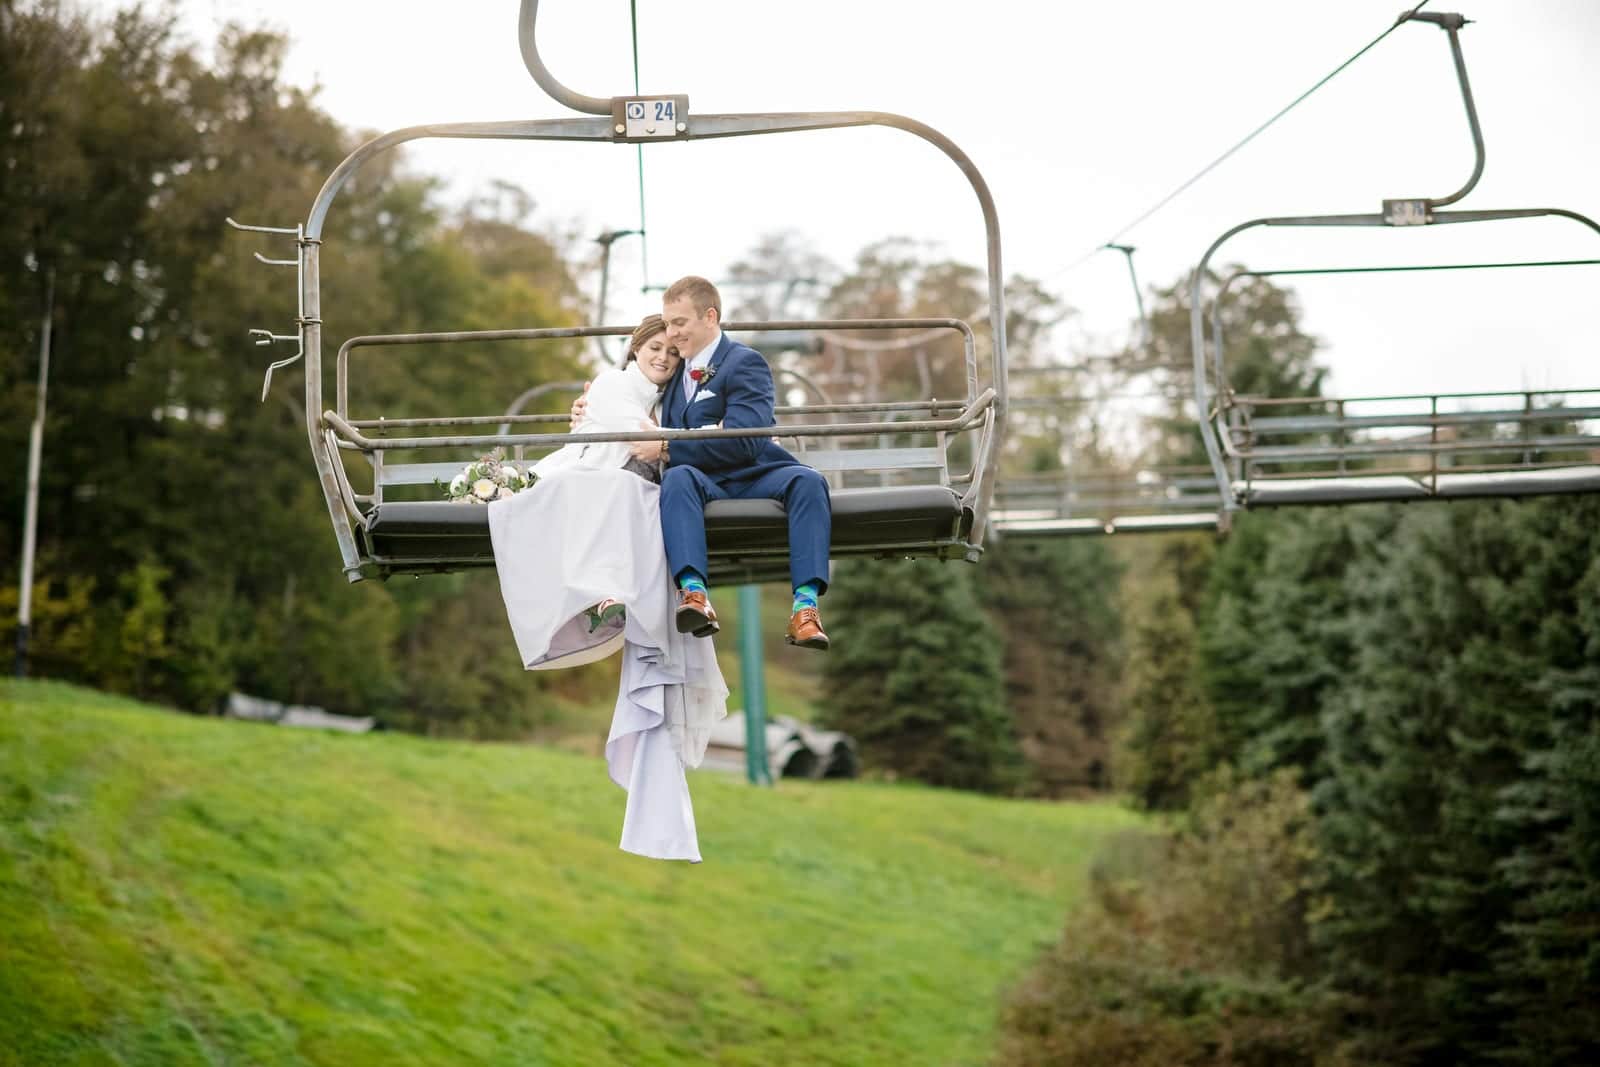 A bride and groom cuddle as they ride a ski lift chair after their Seven Springs wedding.